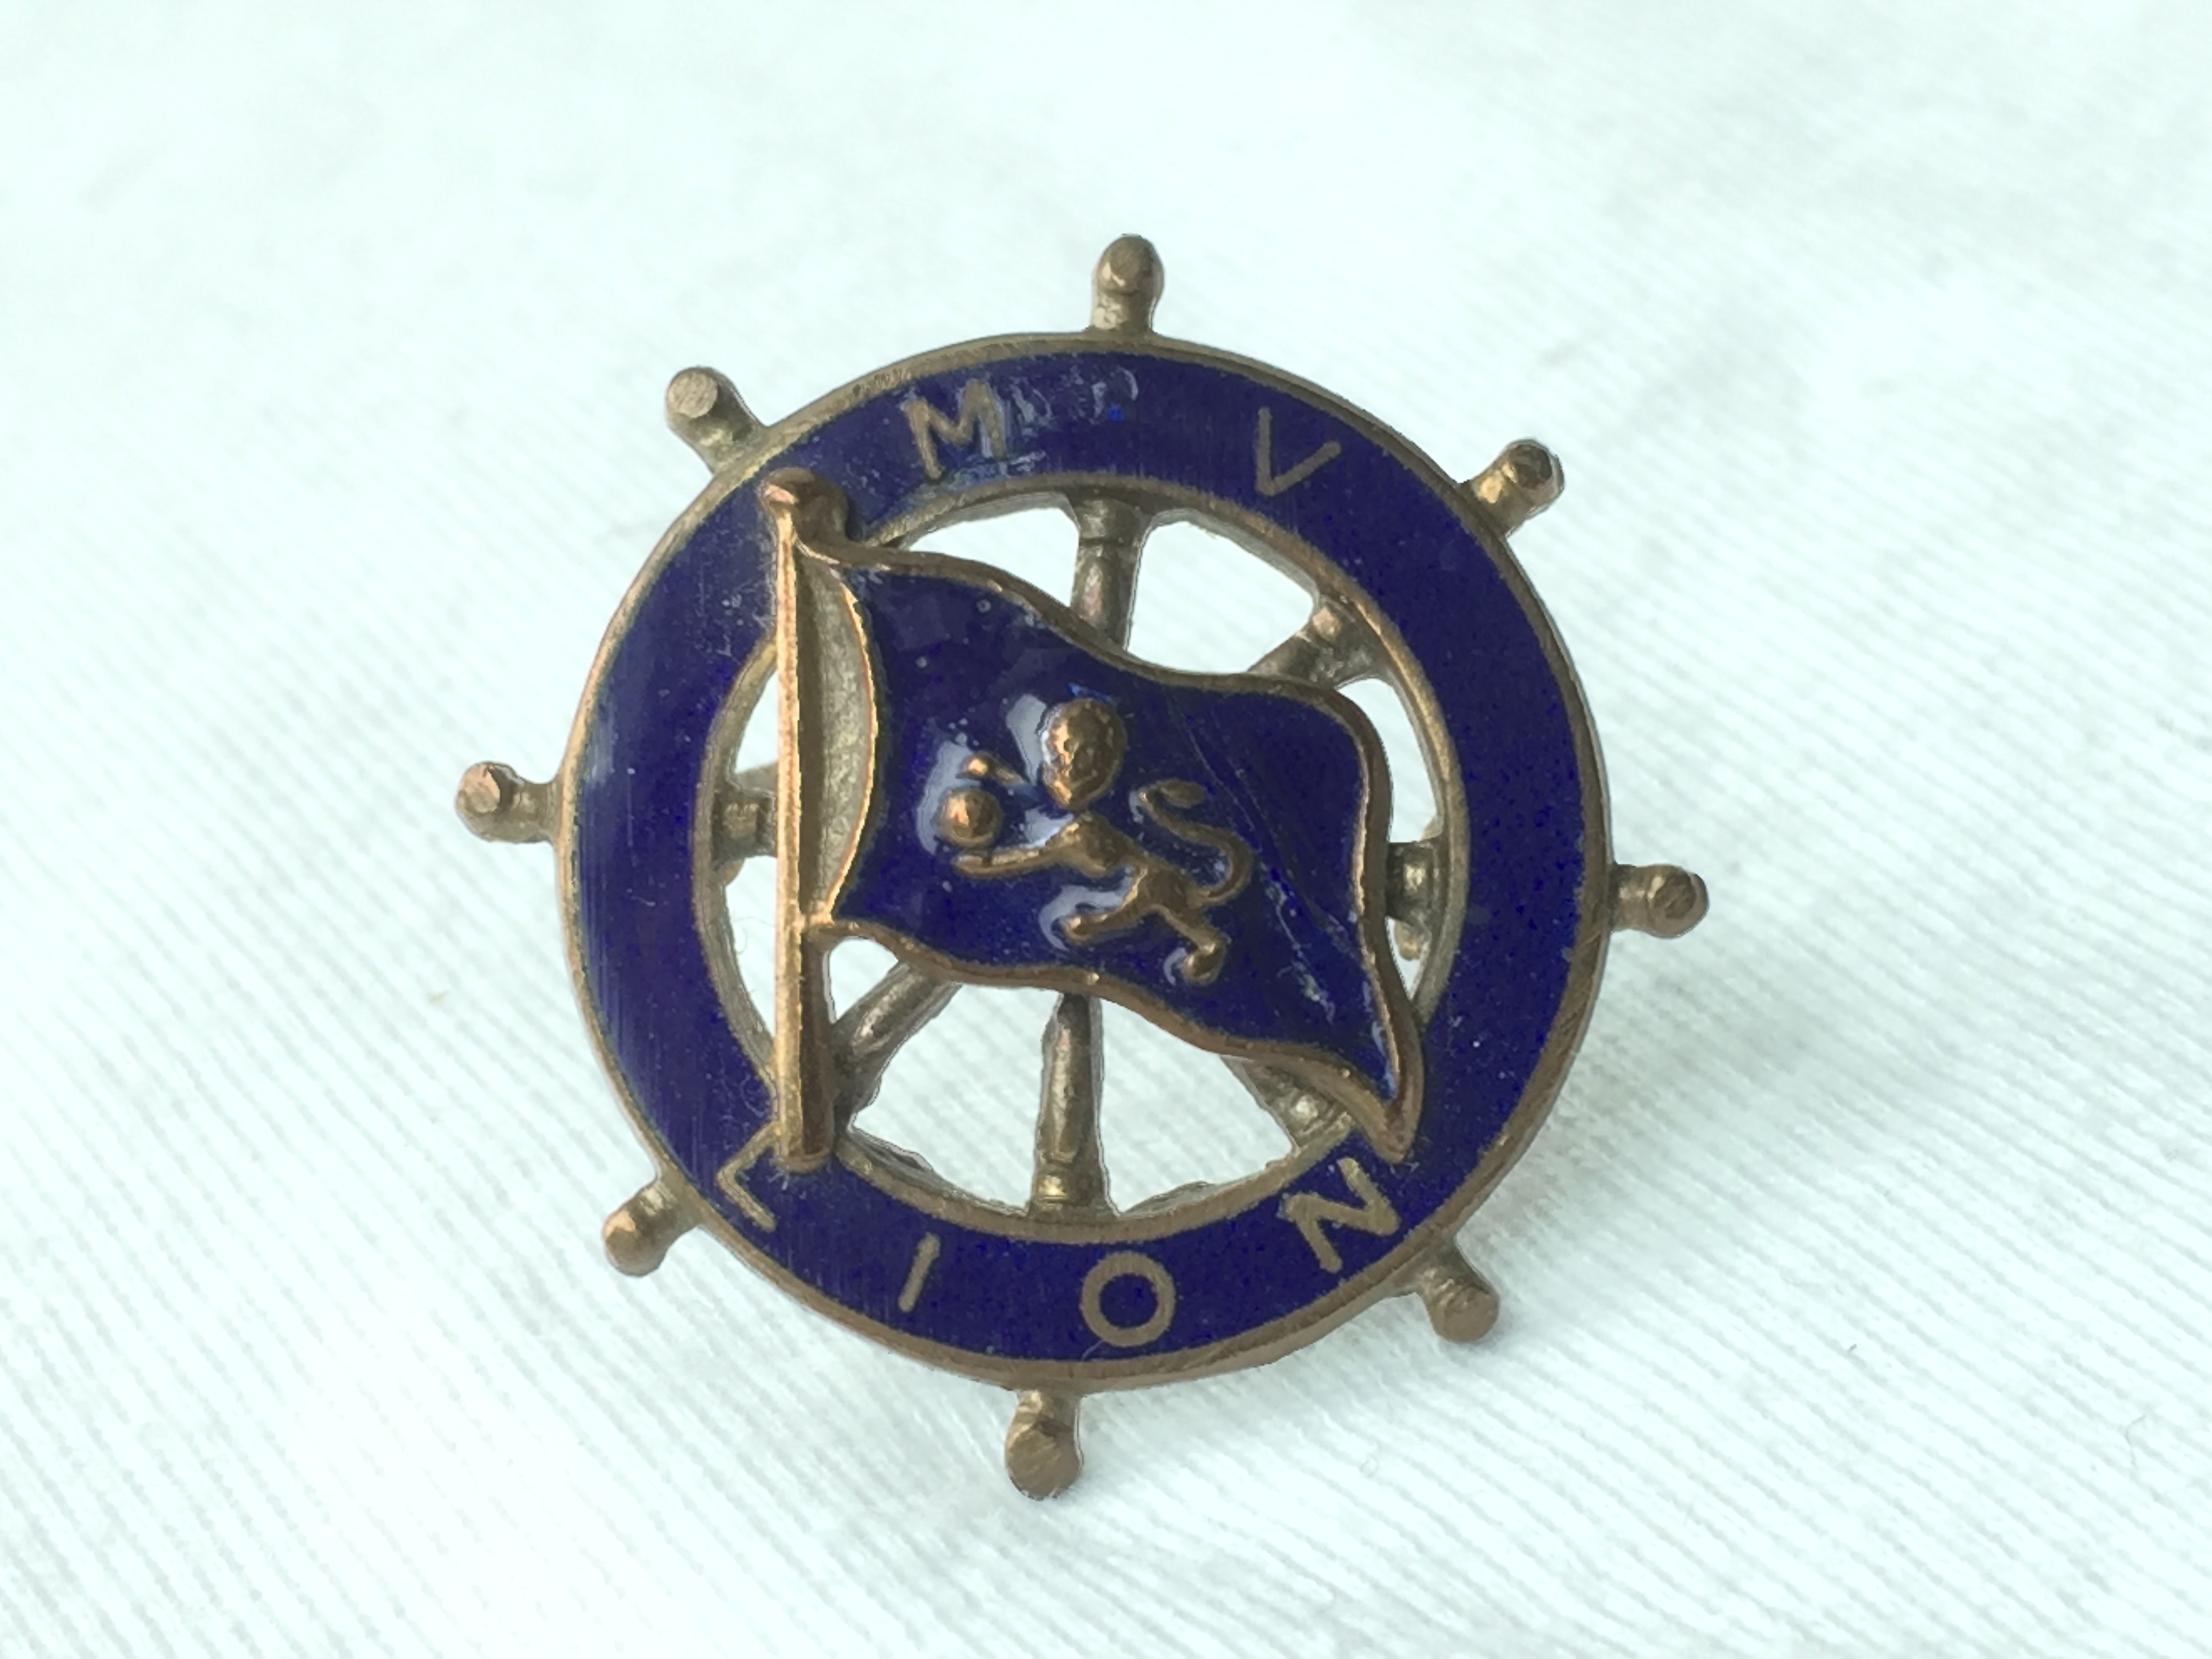 LAPEL PIN BADGE FROM THE BURNS AND LAIRDS LINE VESSEL THE MV LION